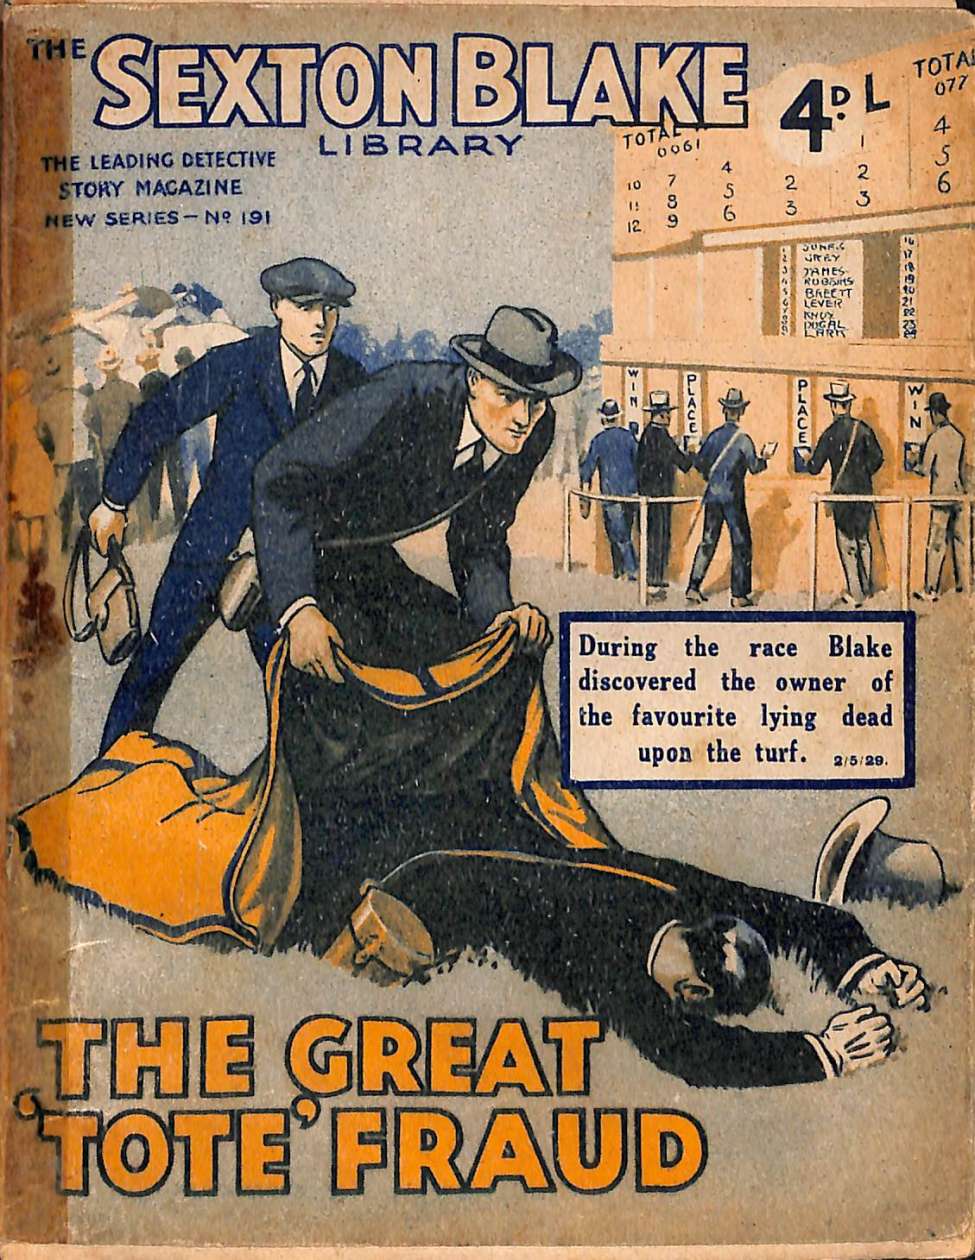 Book Cover For Sexton Blake Library S2 191 - The Great 'Tote' Fraud